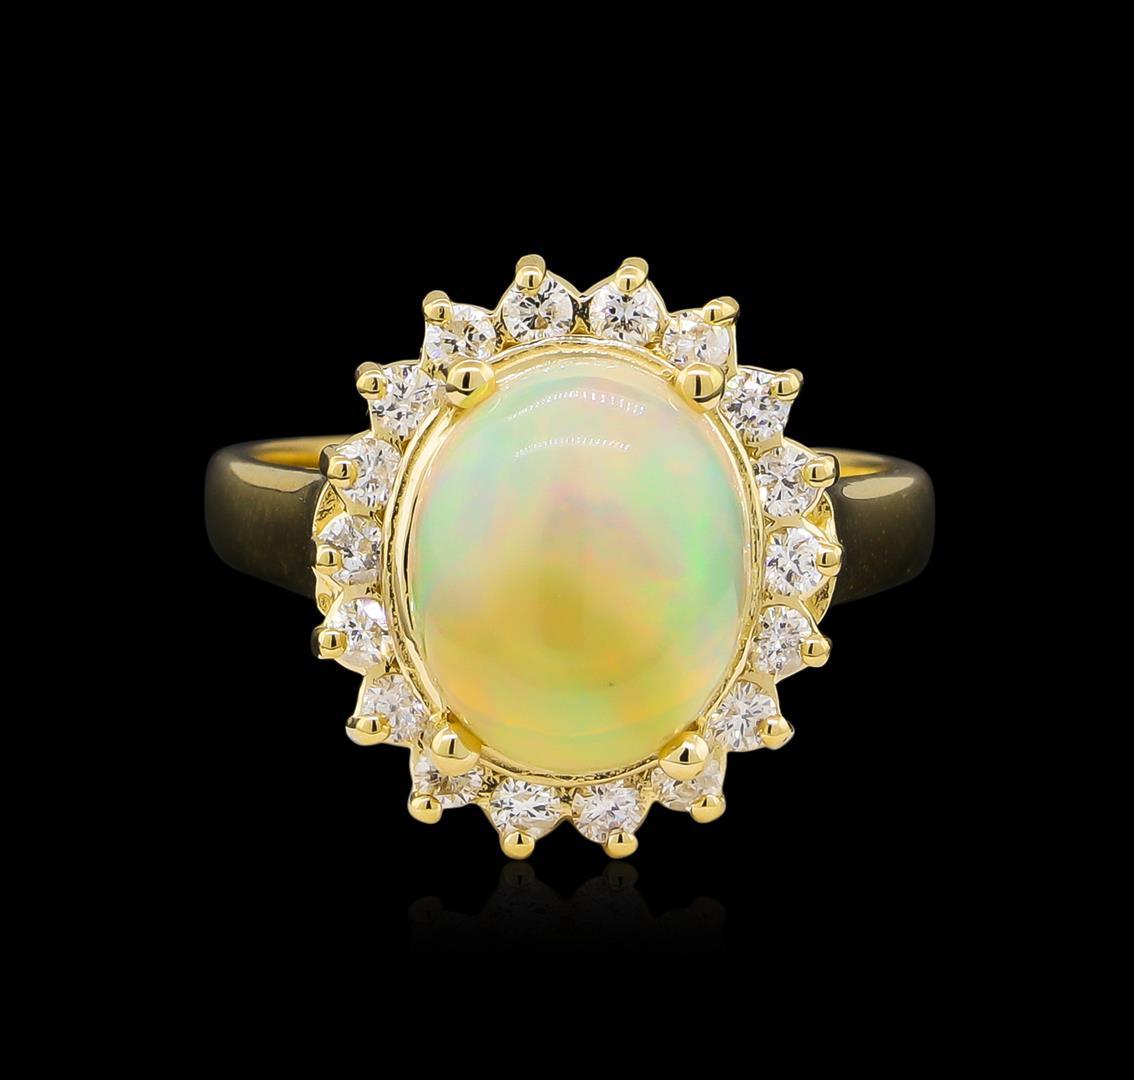 2.48 ctw Opal and Diamond Ring - 14KT Yellow Gold